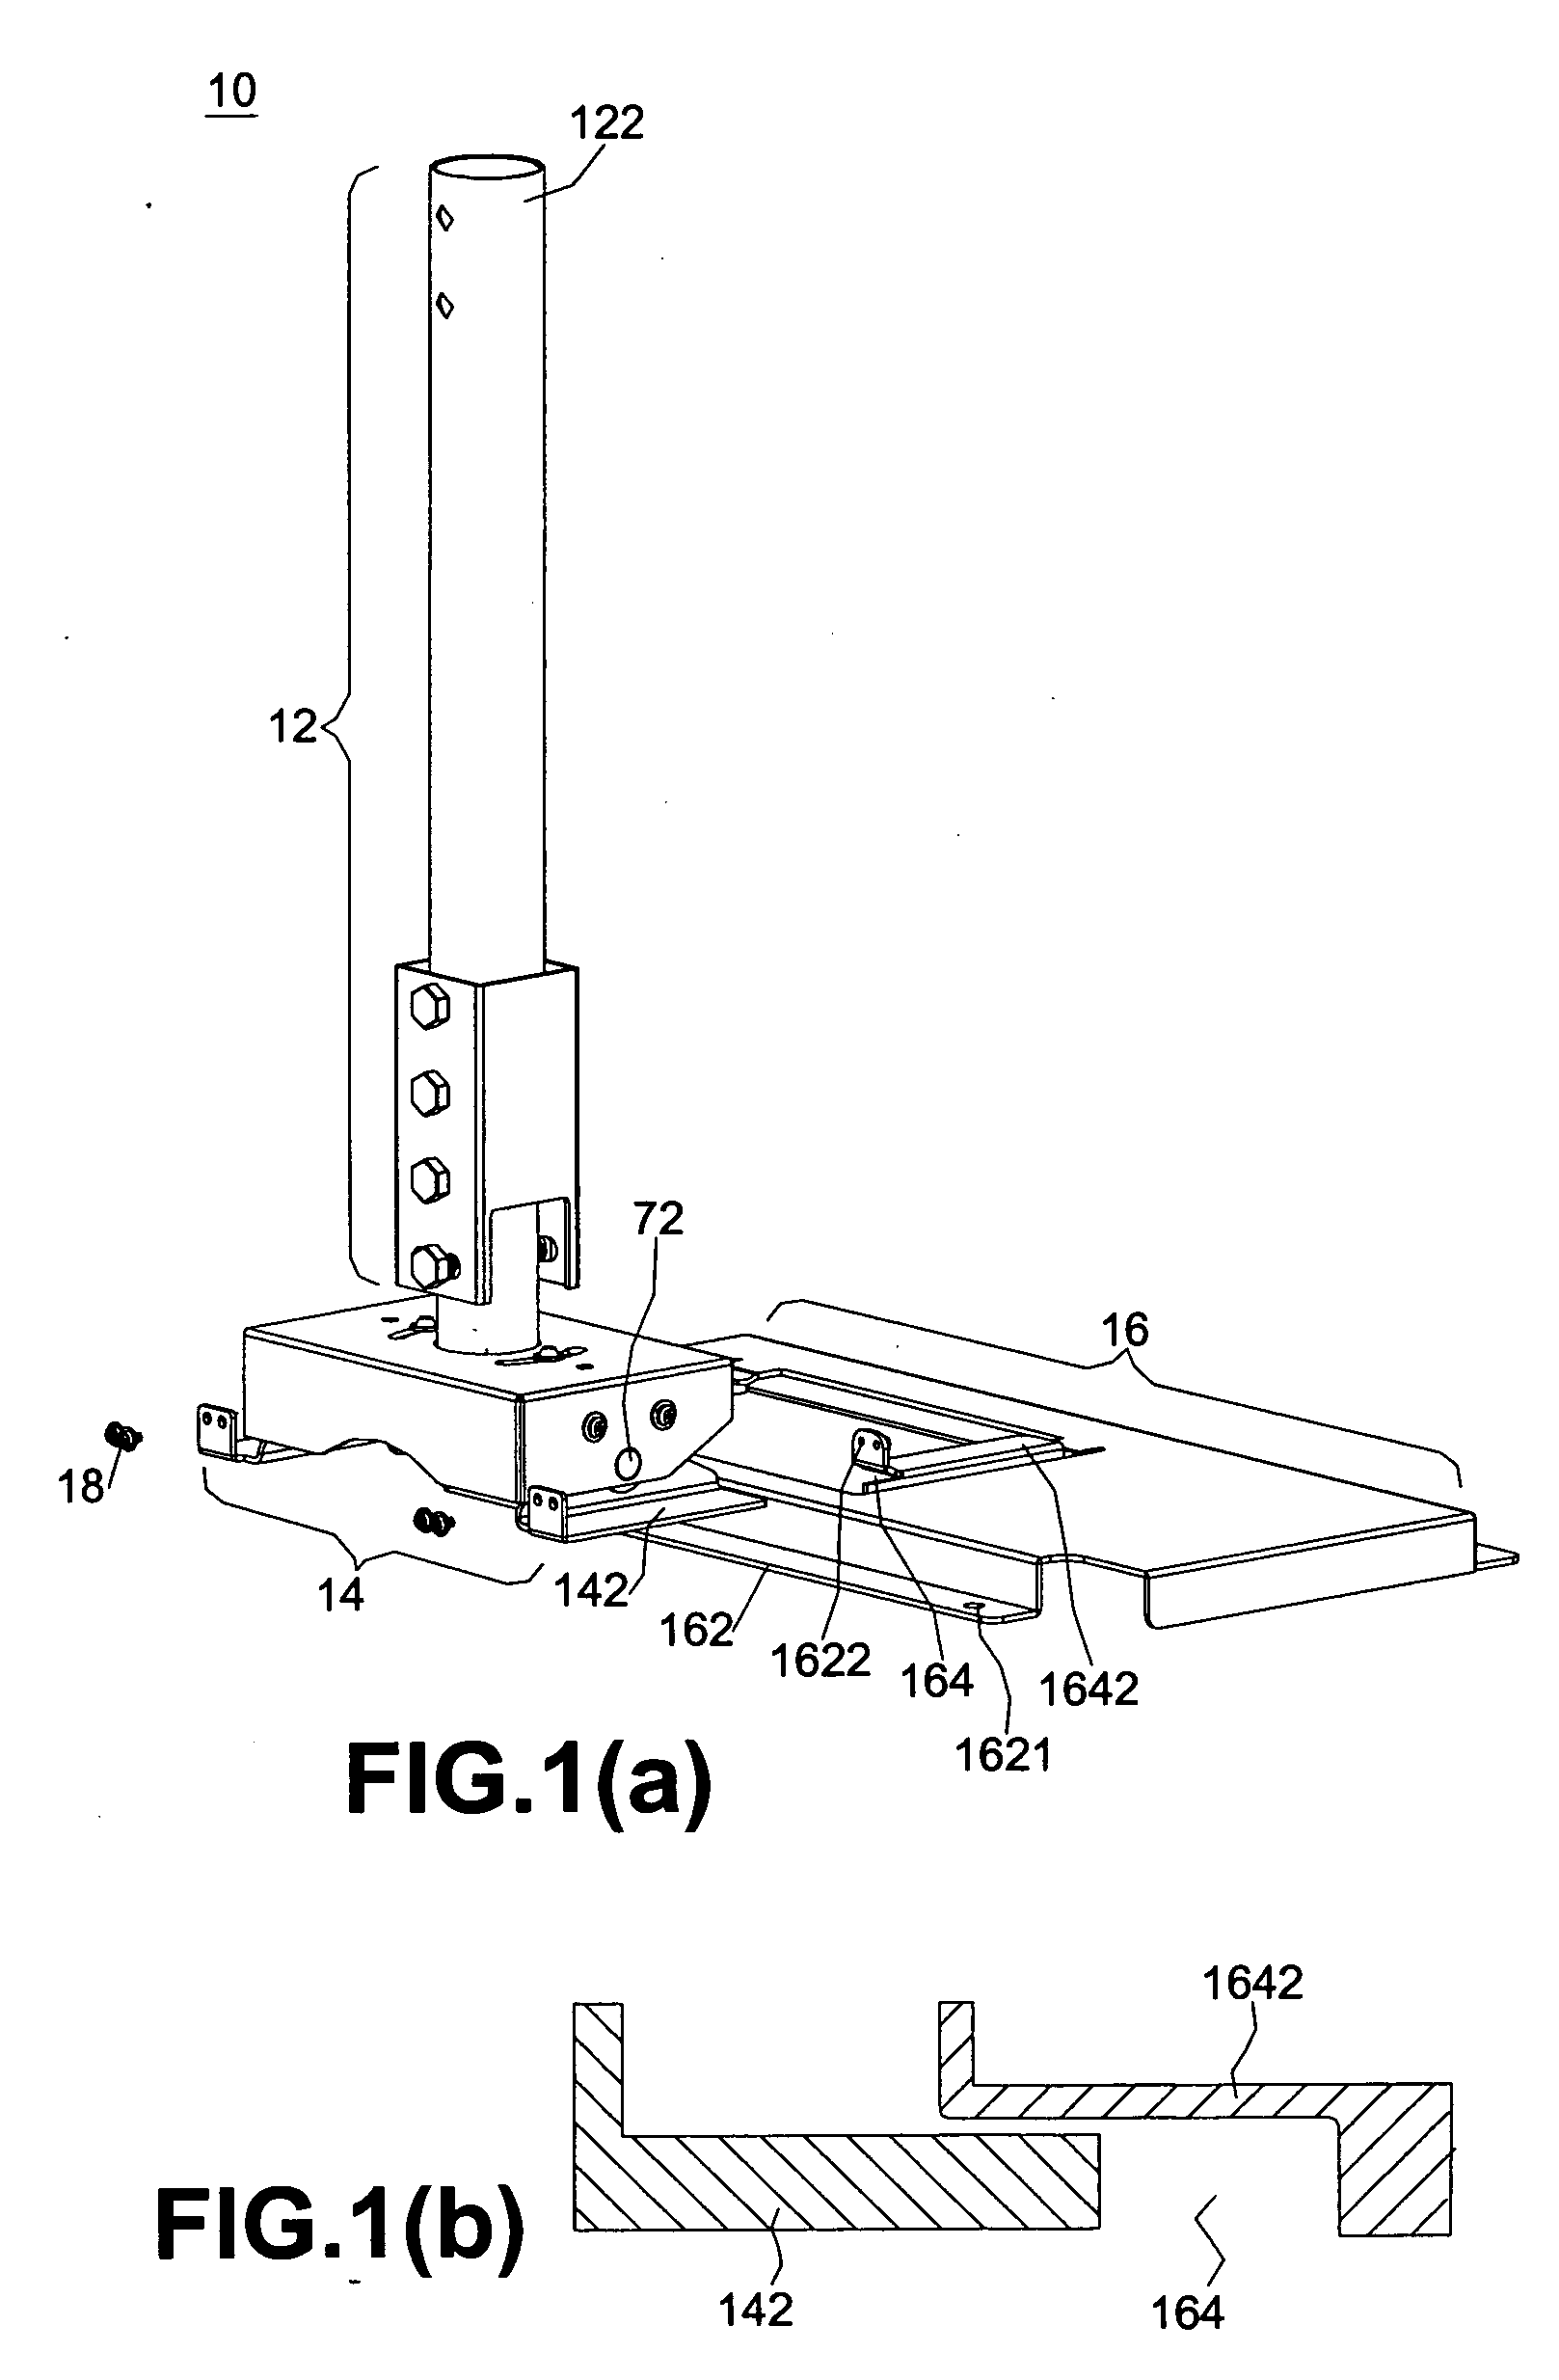 Structure for hanging an electronic device